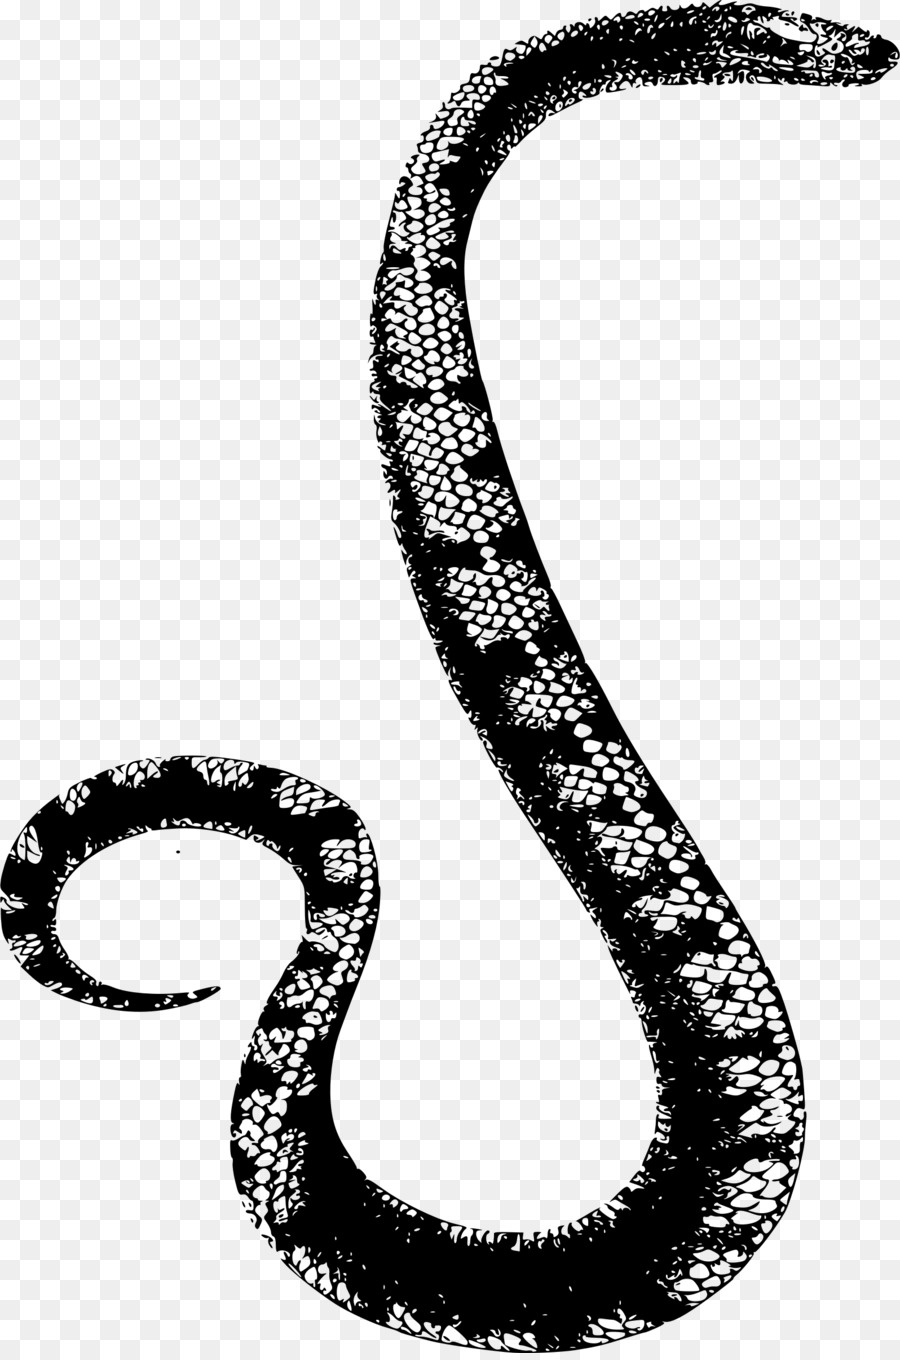 Snakes Clip art Reptile Vipers Boa constrictor - simple snake png download - 1596*2400 - Free Transparent Snakes png Download.